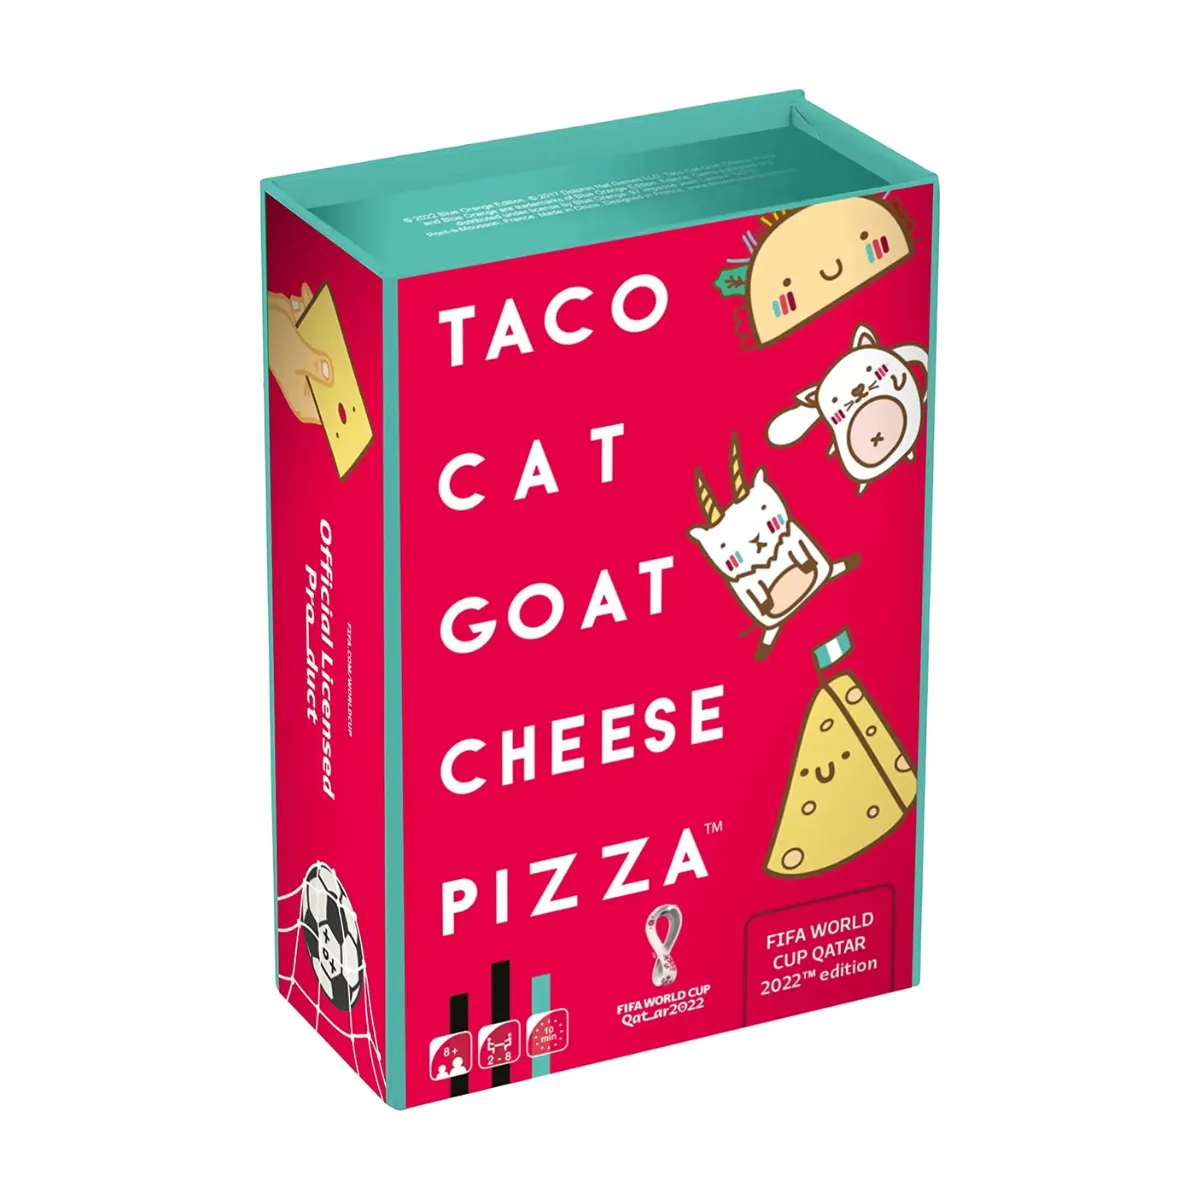 Score Big with Taco Cat Goat Cheese Pizza: Fifa Edition!